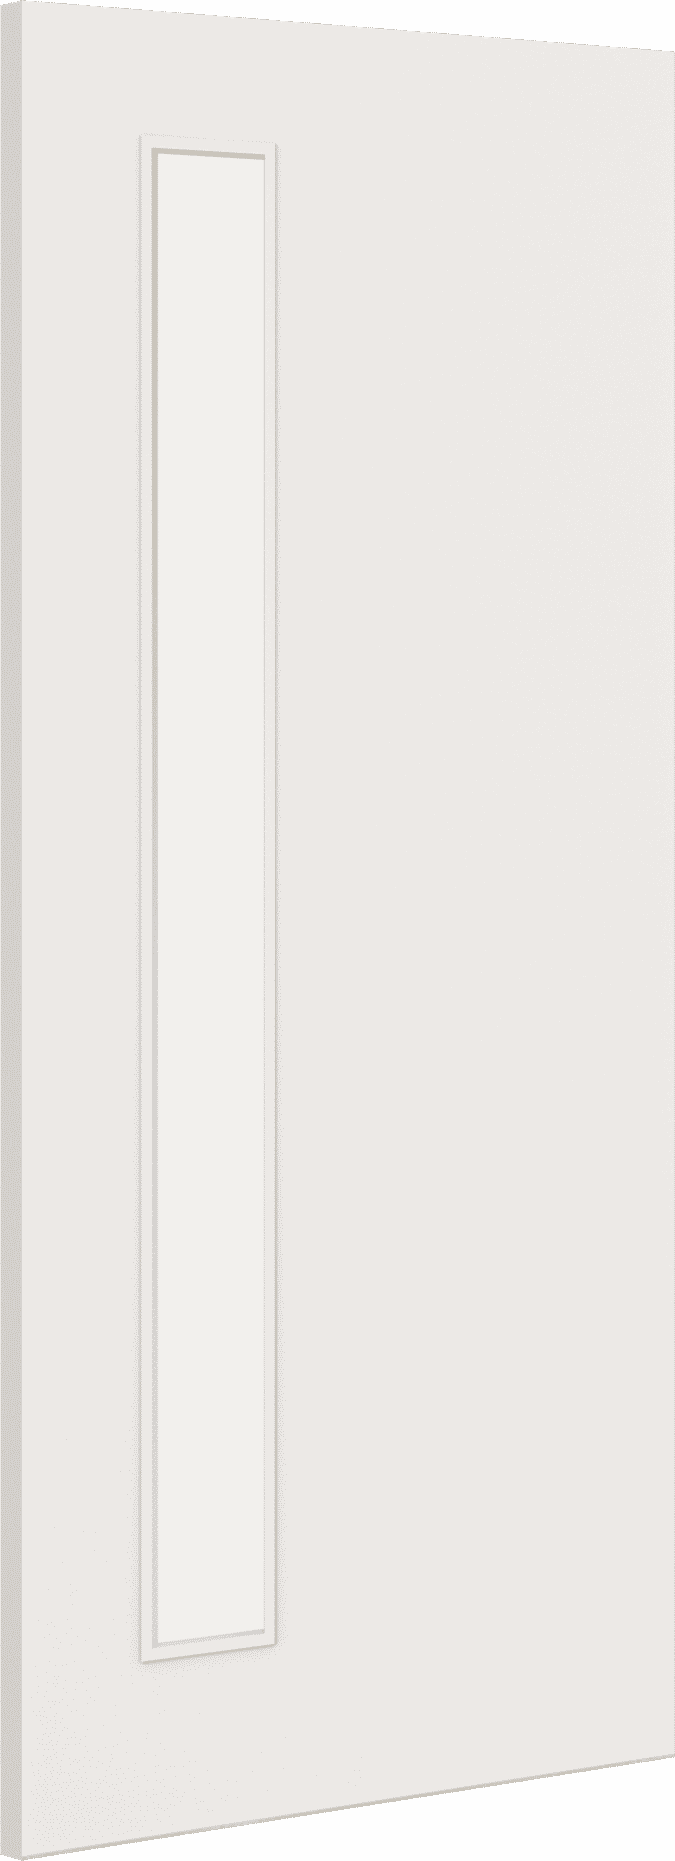 2040mm x 926mm x 44mm Architectural Paint Grade White 06 Clear Glazed Fire Door Blank